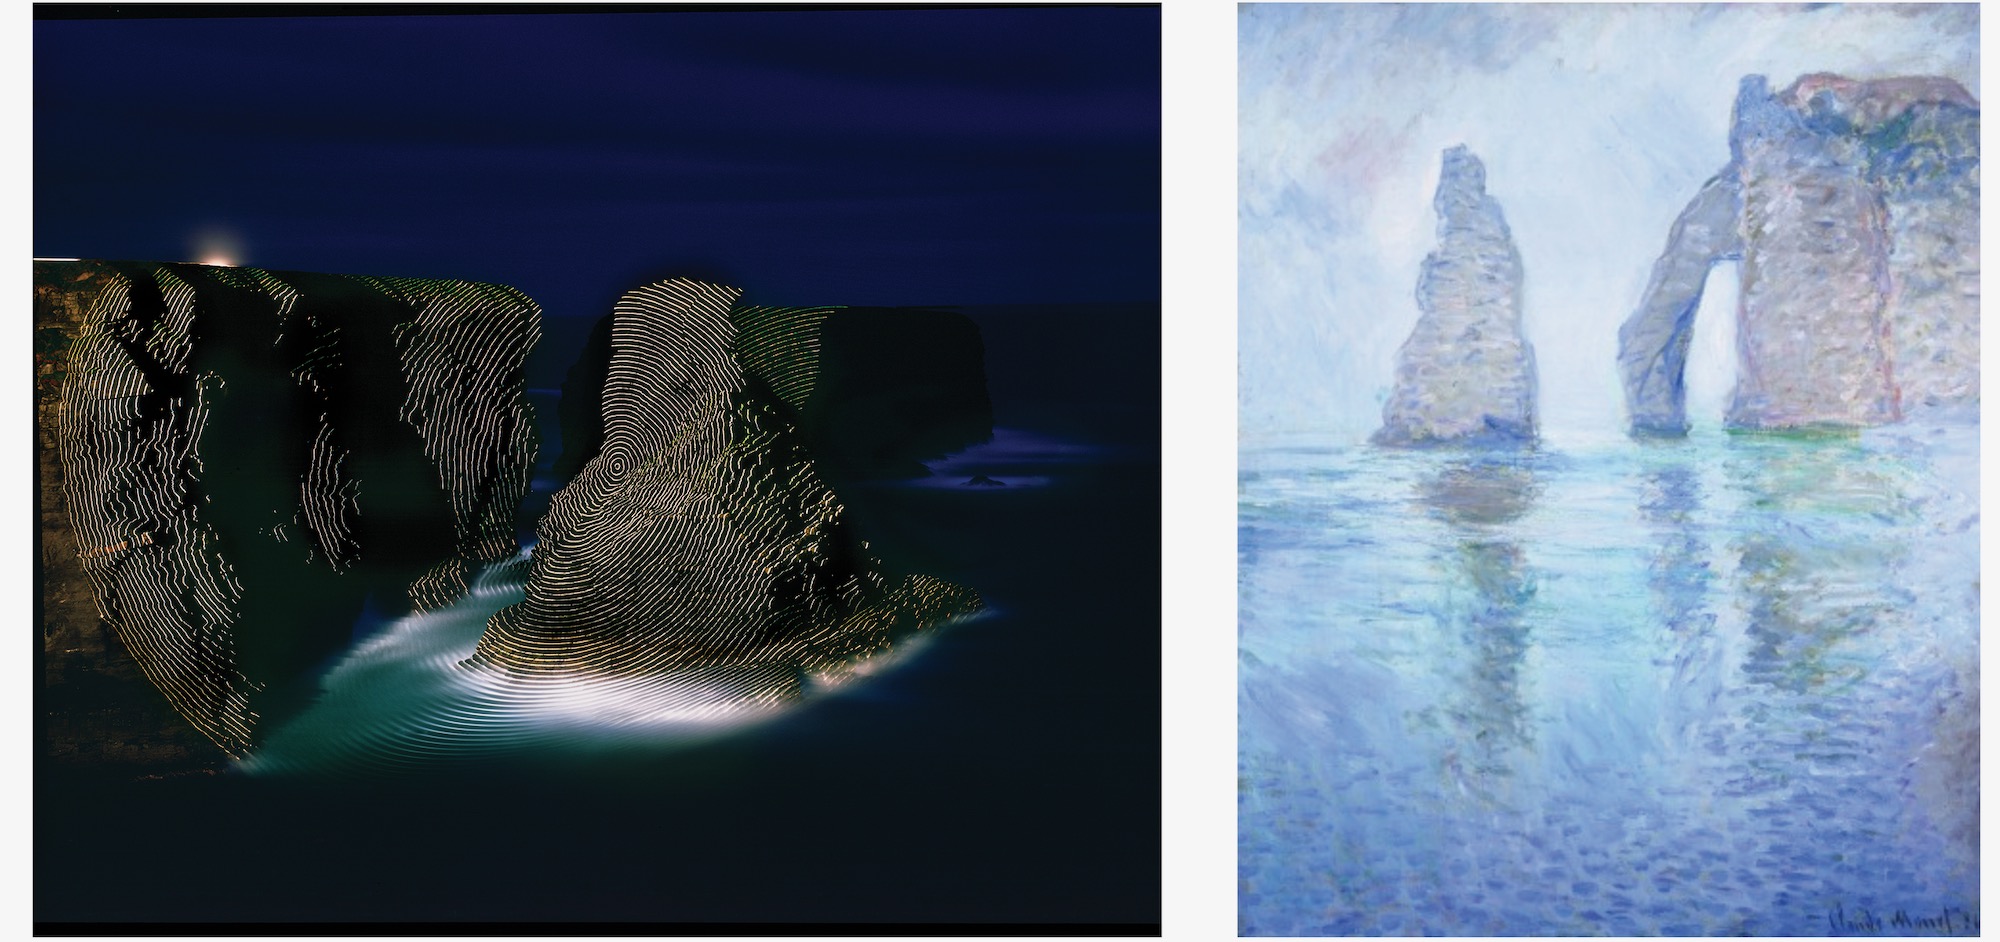 Jim Sanborn, Kilkee County Claire, Ireland, 1997, large format projection, digital print. Claude Monet, The Rock Needle and the Porte d’Aval Seen from the West, 1886, oil on canvas.